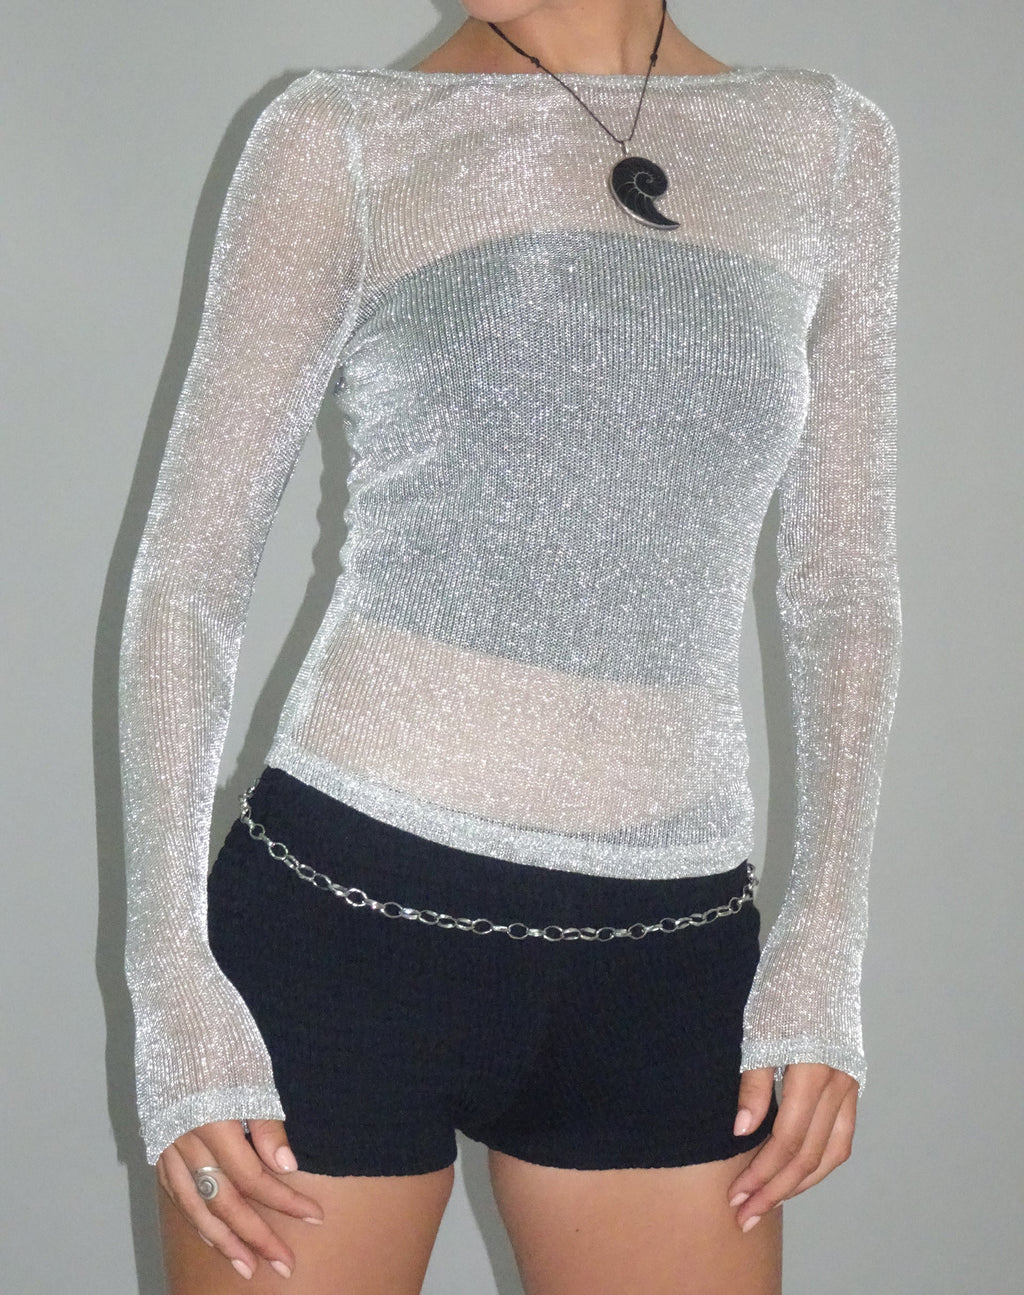 Suzette Long Sleeve Top in Silver Chain